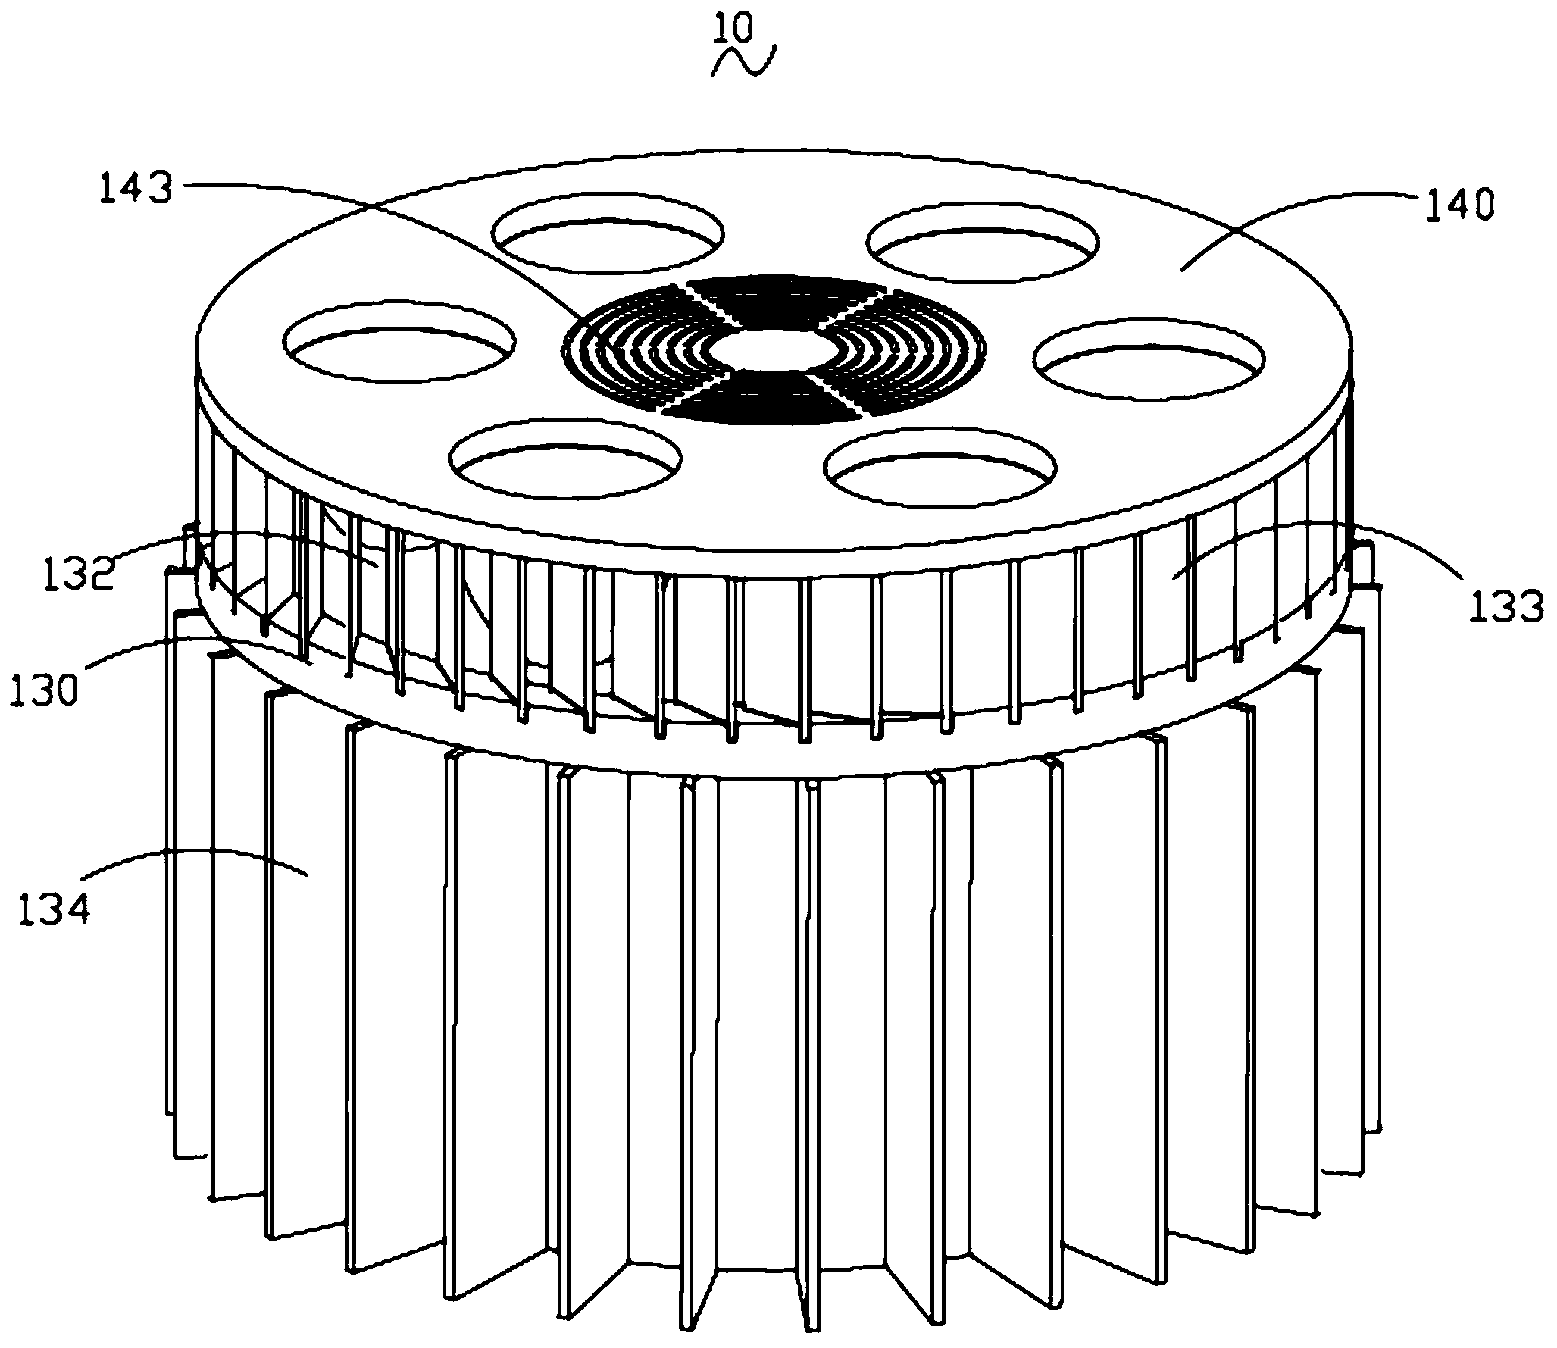 LED (light-emitting diode) lamp with fan